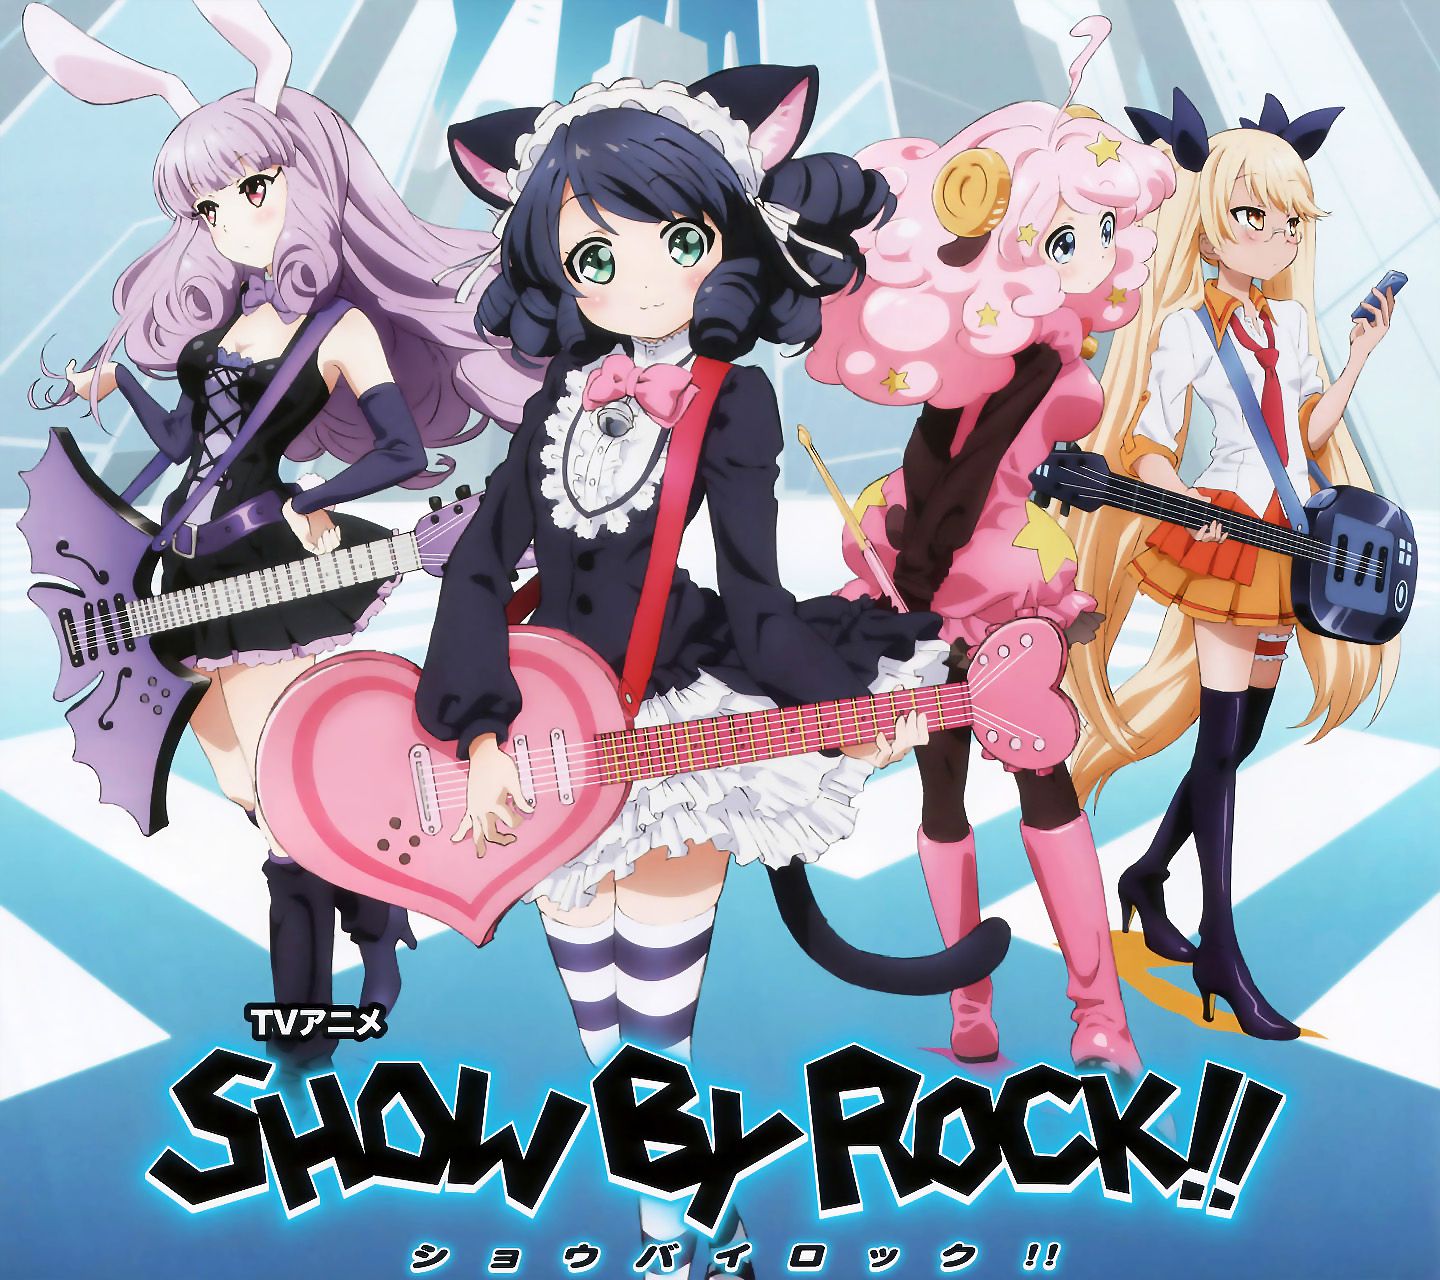 Show By Rock Androidスマホ壁紙 スクロール対応 1 アニメ壁紙ネット Pc Android Iphone壁紙 画像